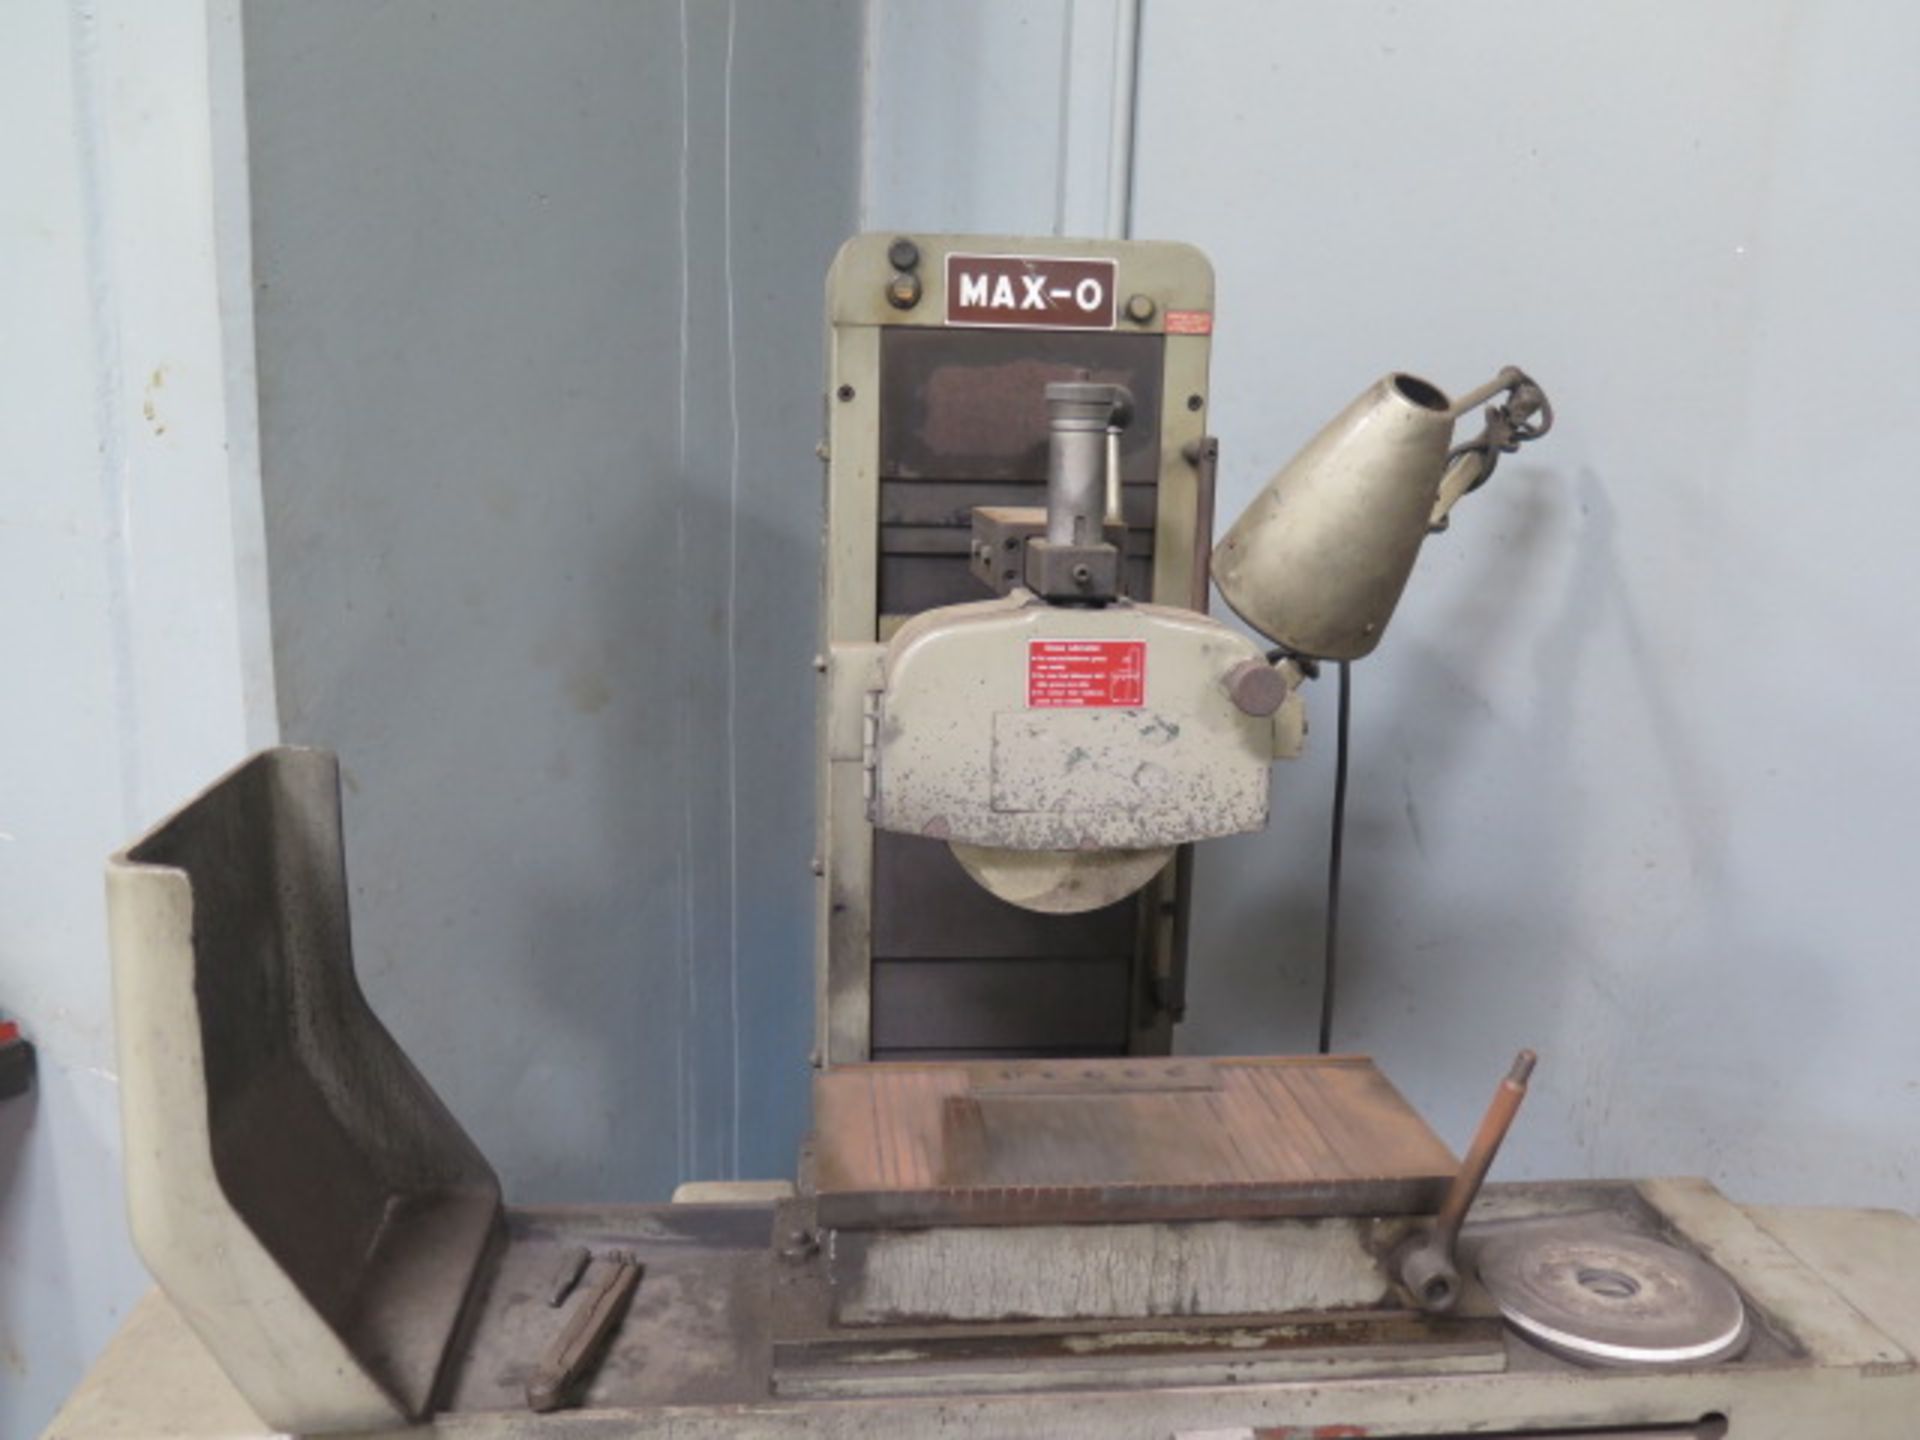 Max-O KGS-200 6" x 14" Surface Grinder s/n 780923-4 w/ Wheel Dresser, 6" x 14" Magnetic Chuck - Image 2 of 7